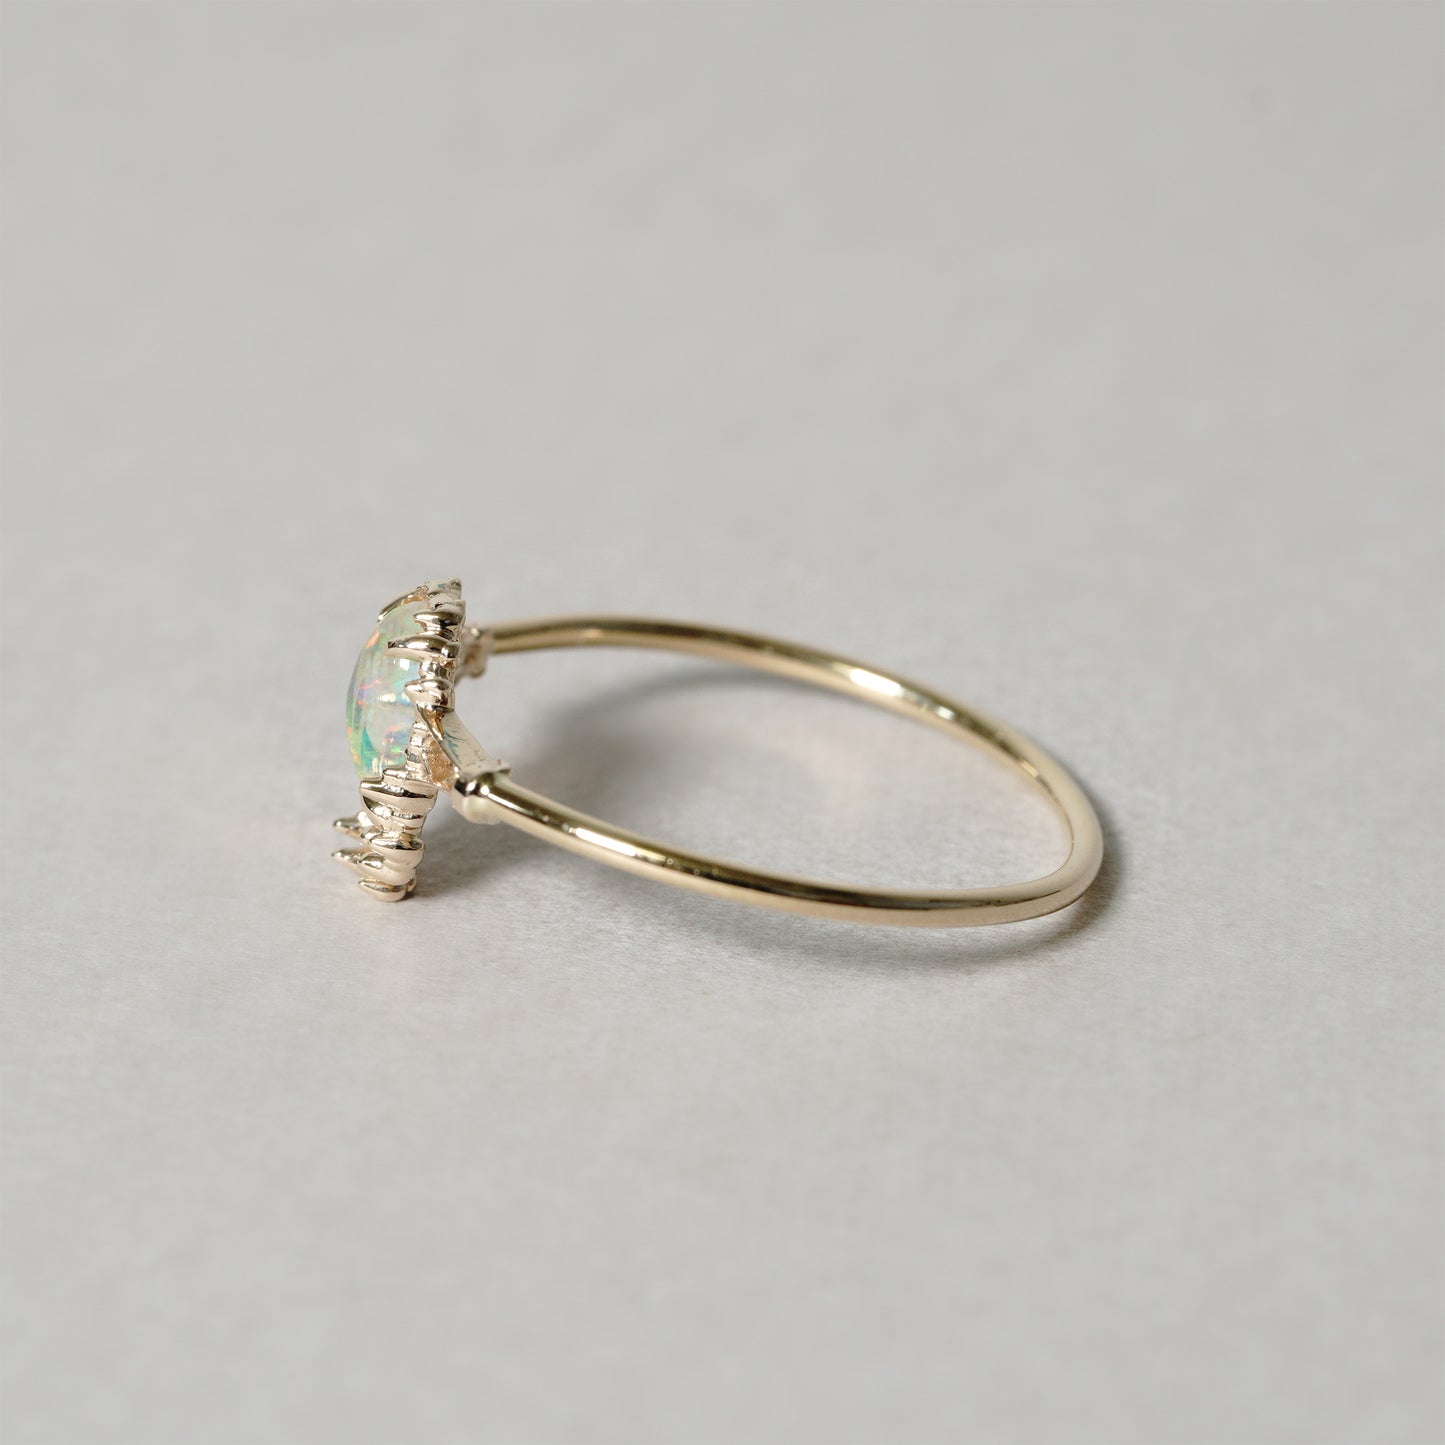 1123 Water Opal Ring